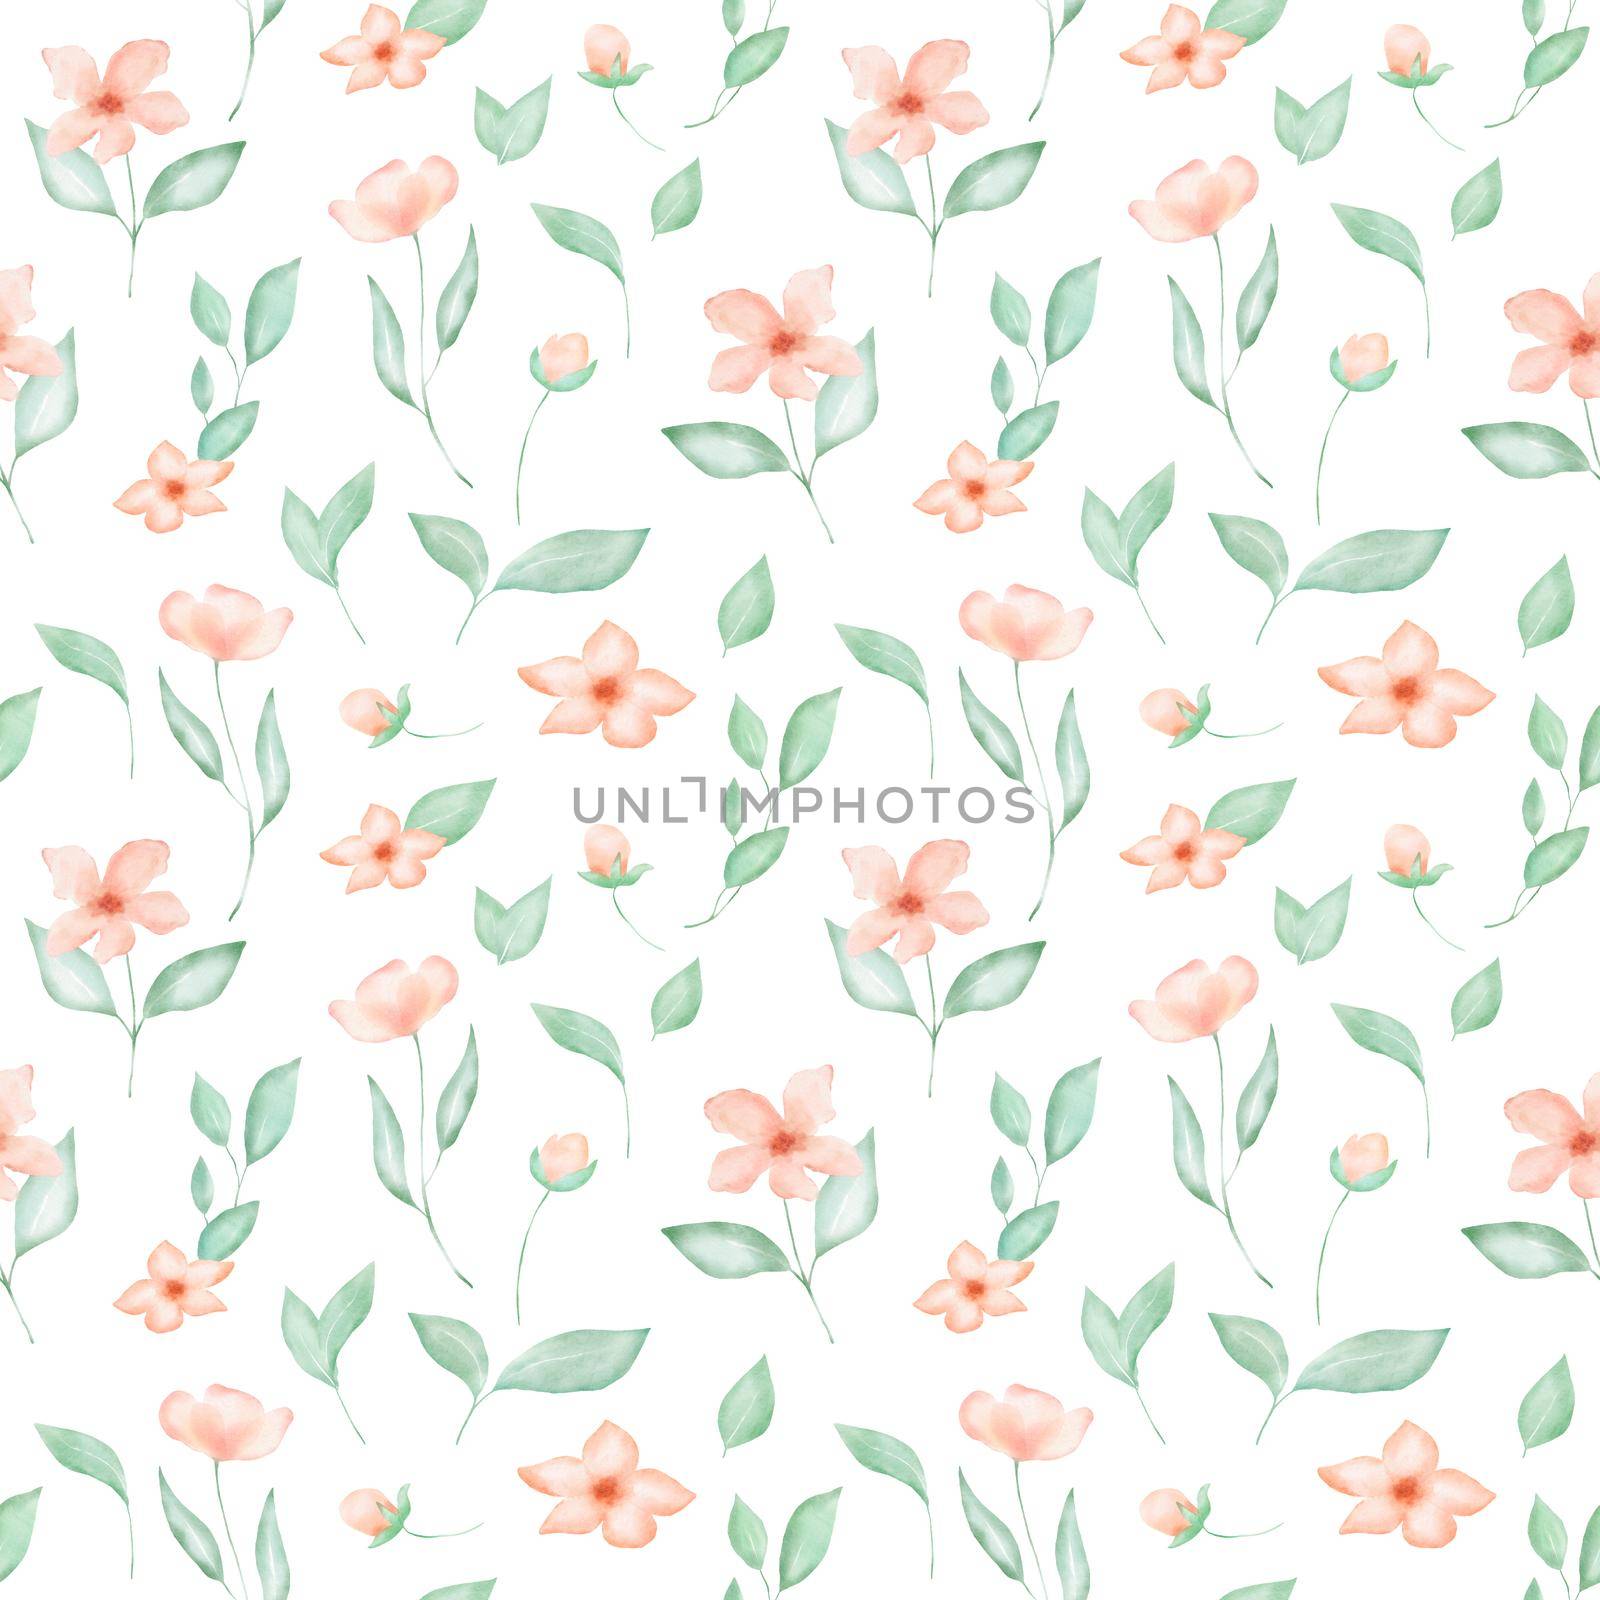 Watercolor floral seamless pattern with pink flowers and leaves. Spring colorful decor with illustrations on white background